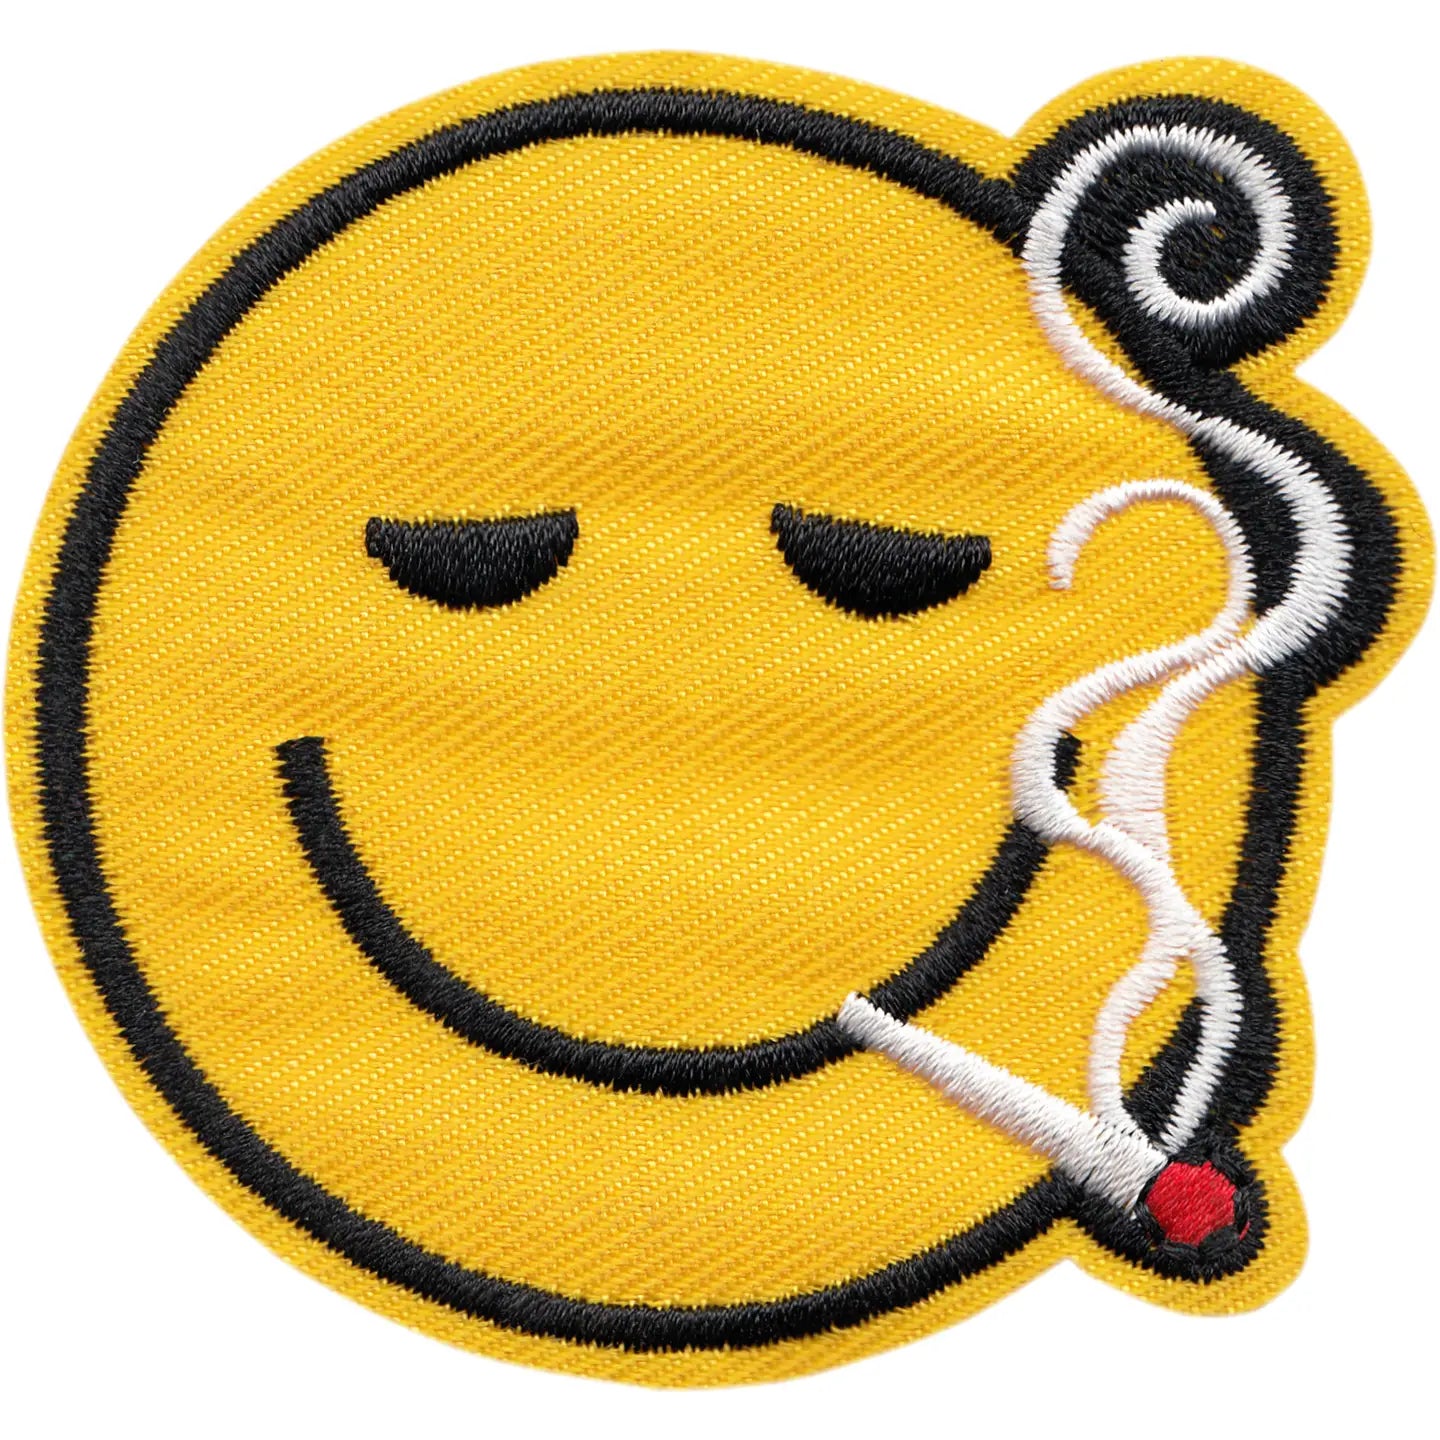 HAPPY FACE SMOKER 420 PATCH